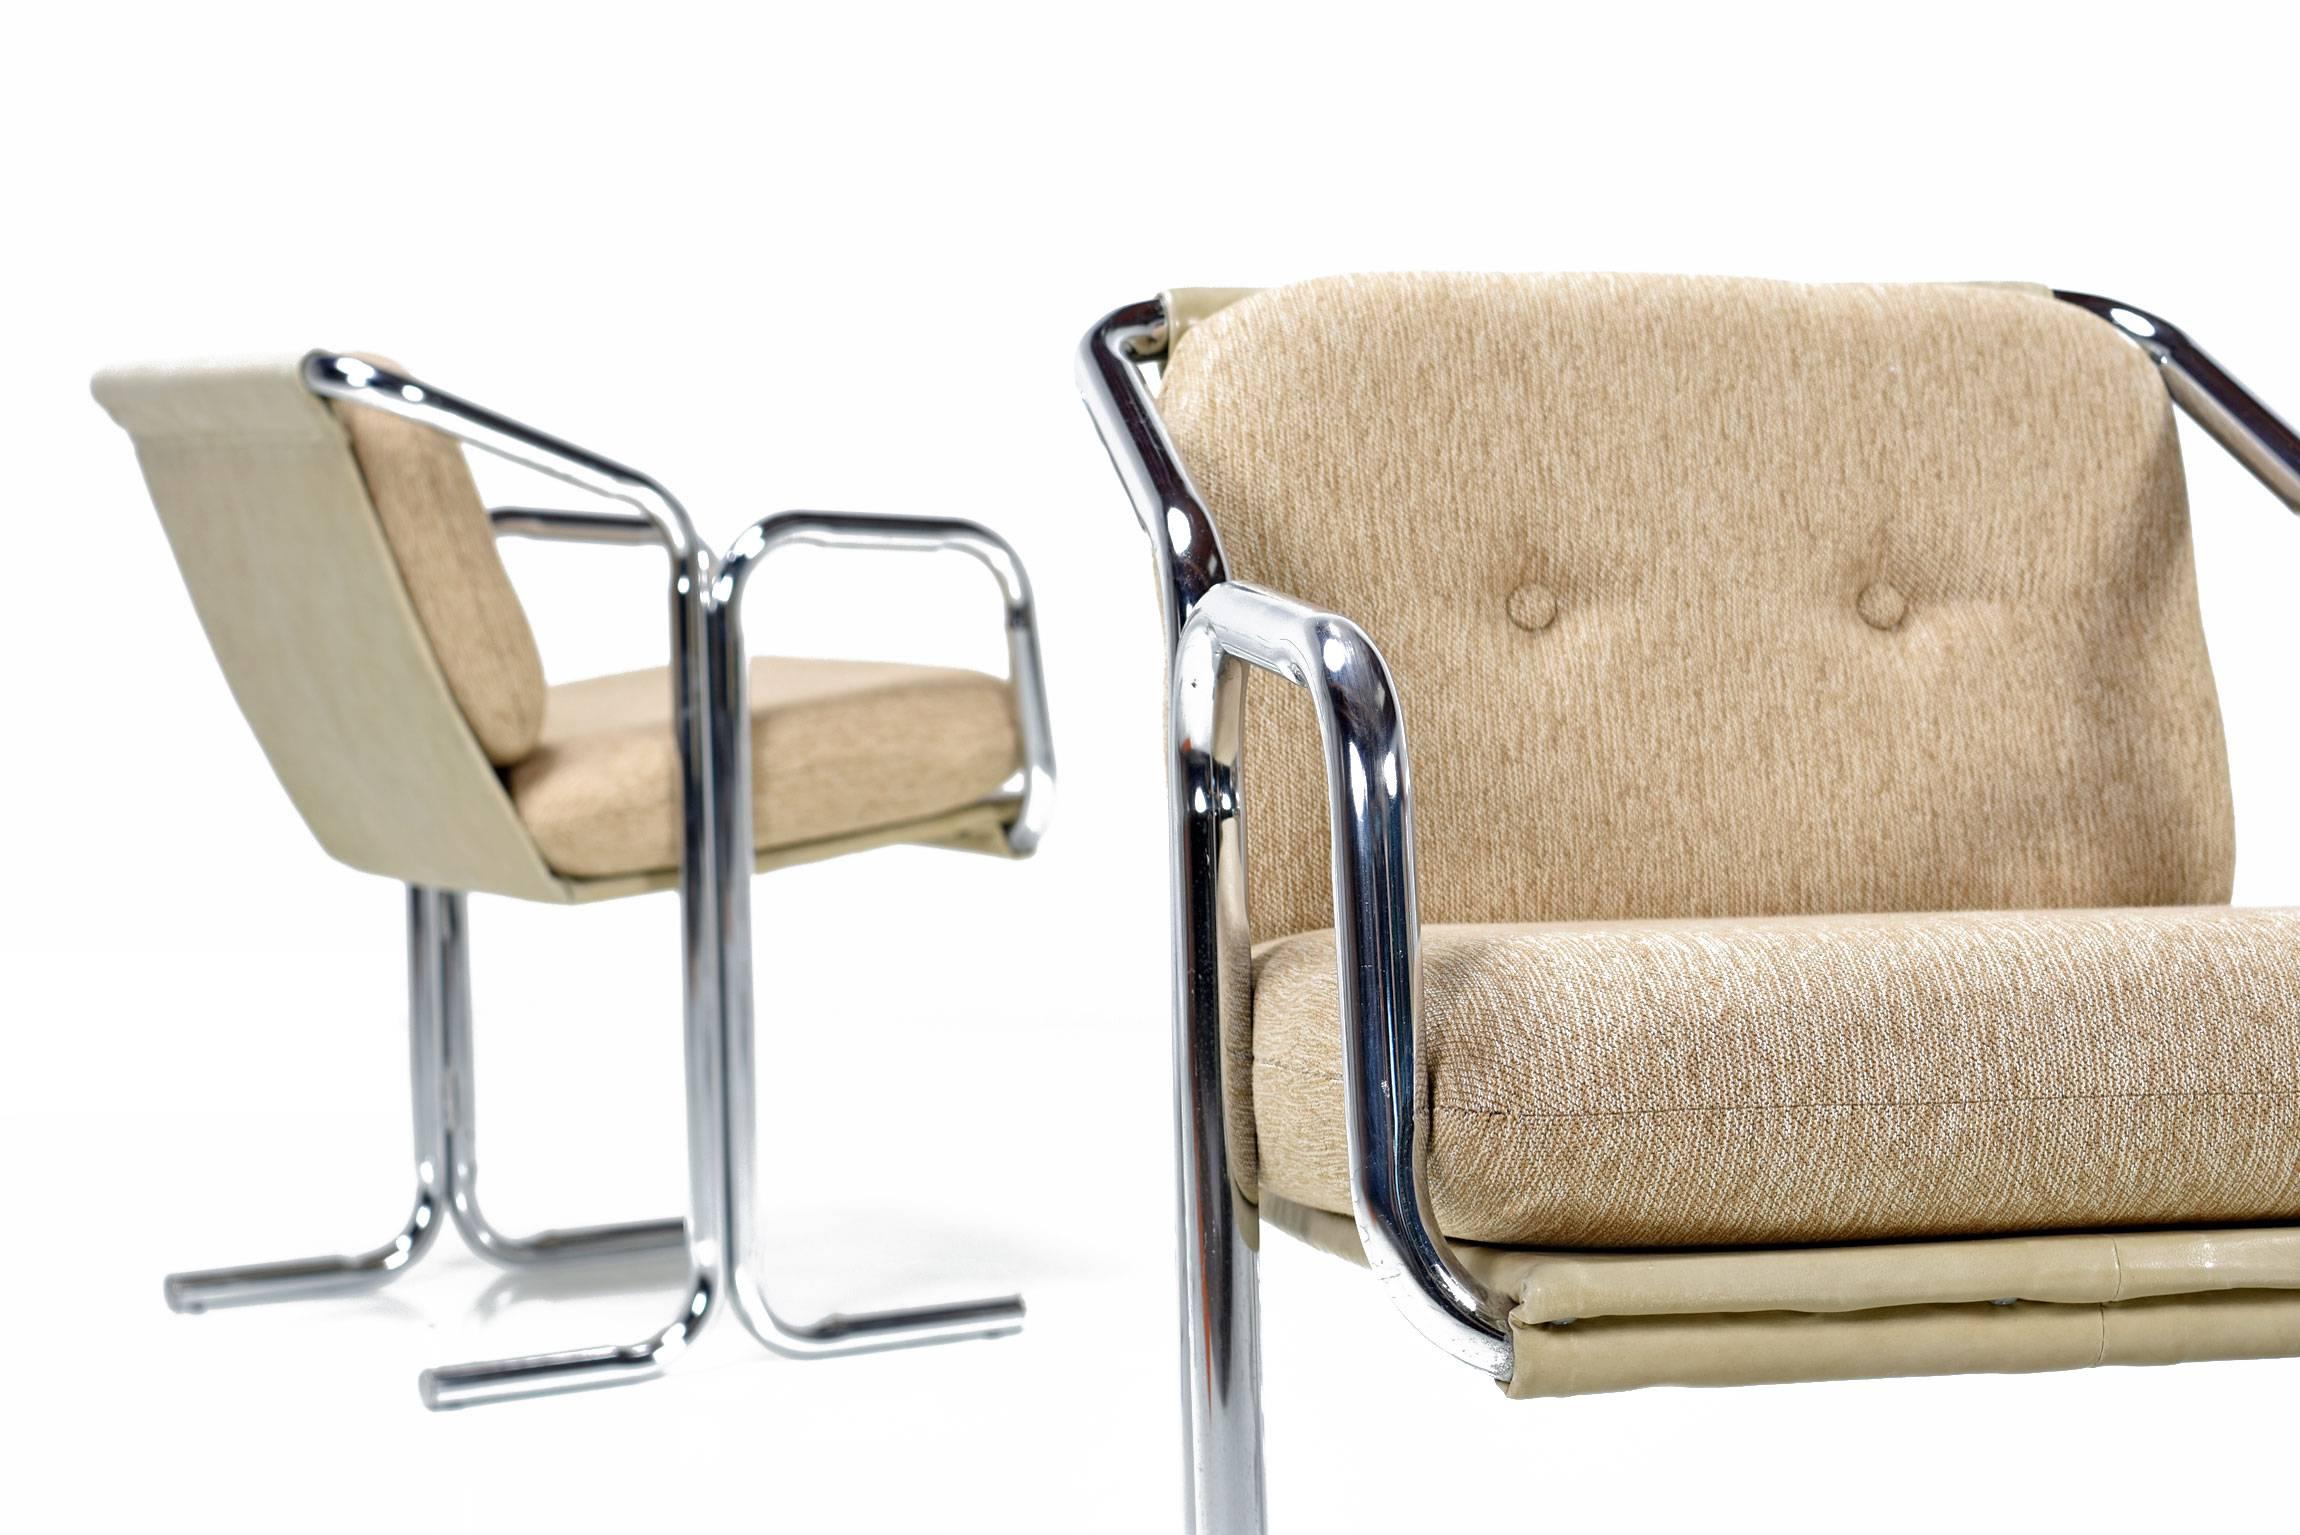 Set of four restored Mid-Century Modern Jerry Johnson chairs. The sleek, contoured, tubular chrome frames are signature Jerry Johnson. Seat is constructed of a vinyl fabric sling with the added support of wood in the bottom. These chairs have been